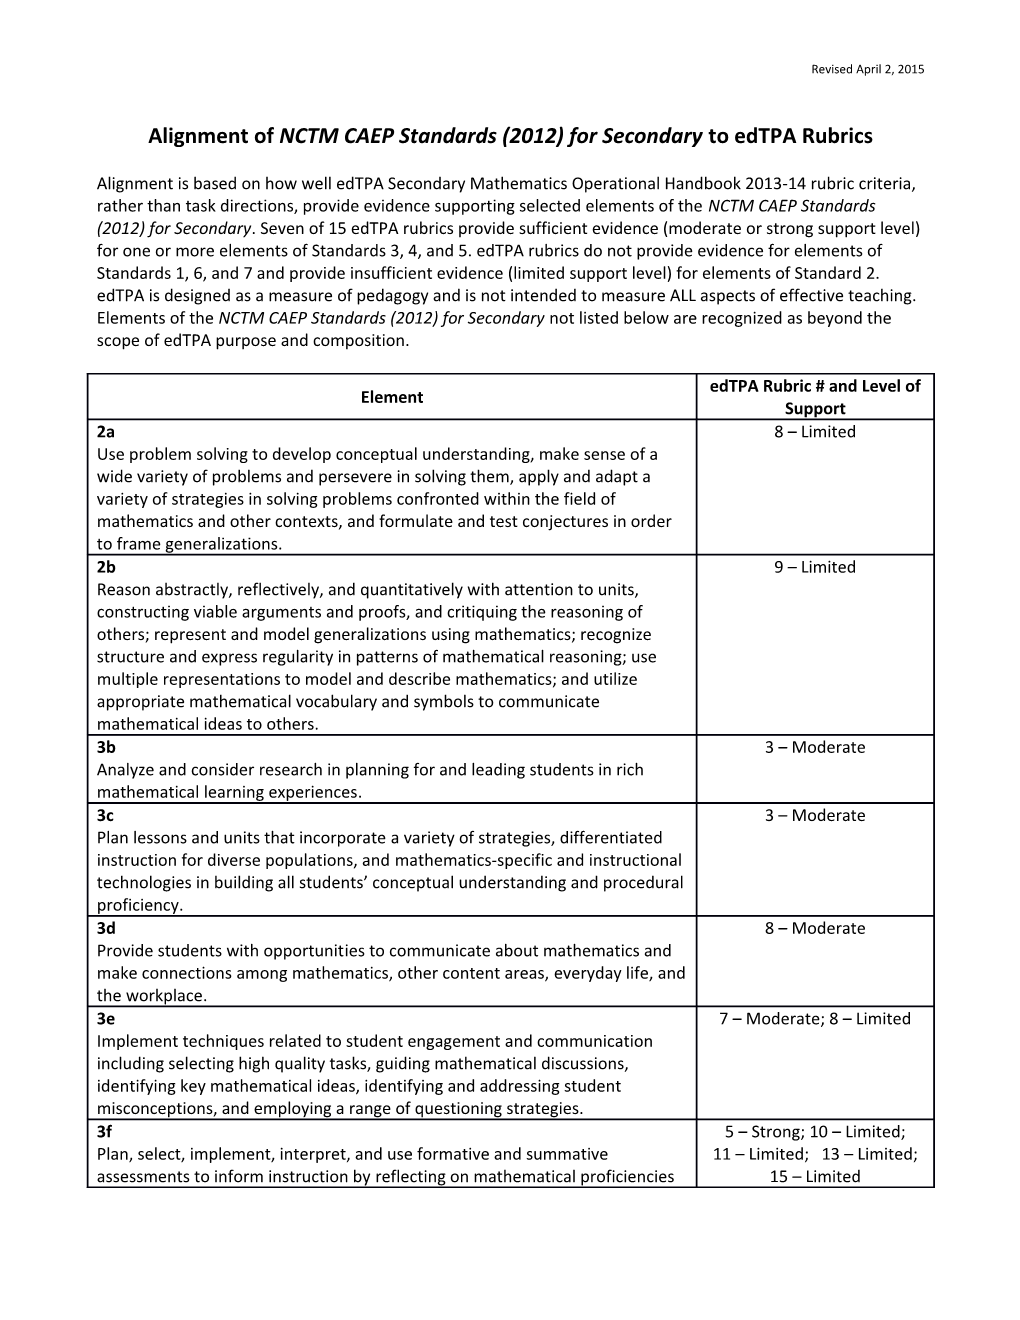 Alignment of NCTM CAEP Standards (2012) for Secondary to Edtpa Rubrics